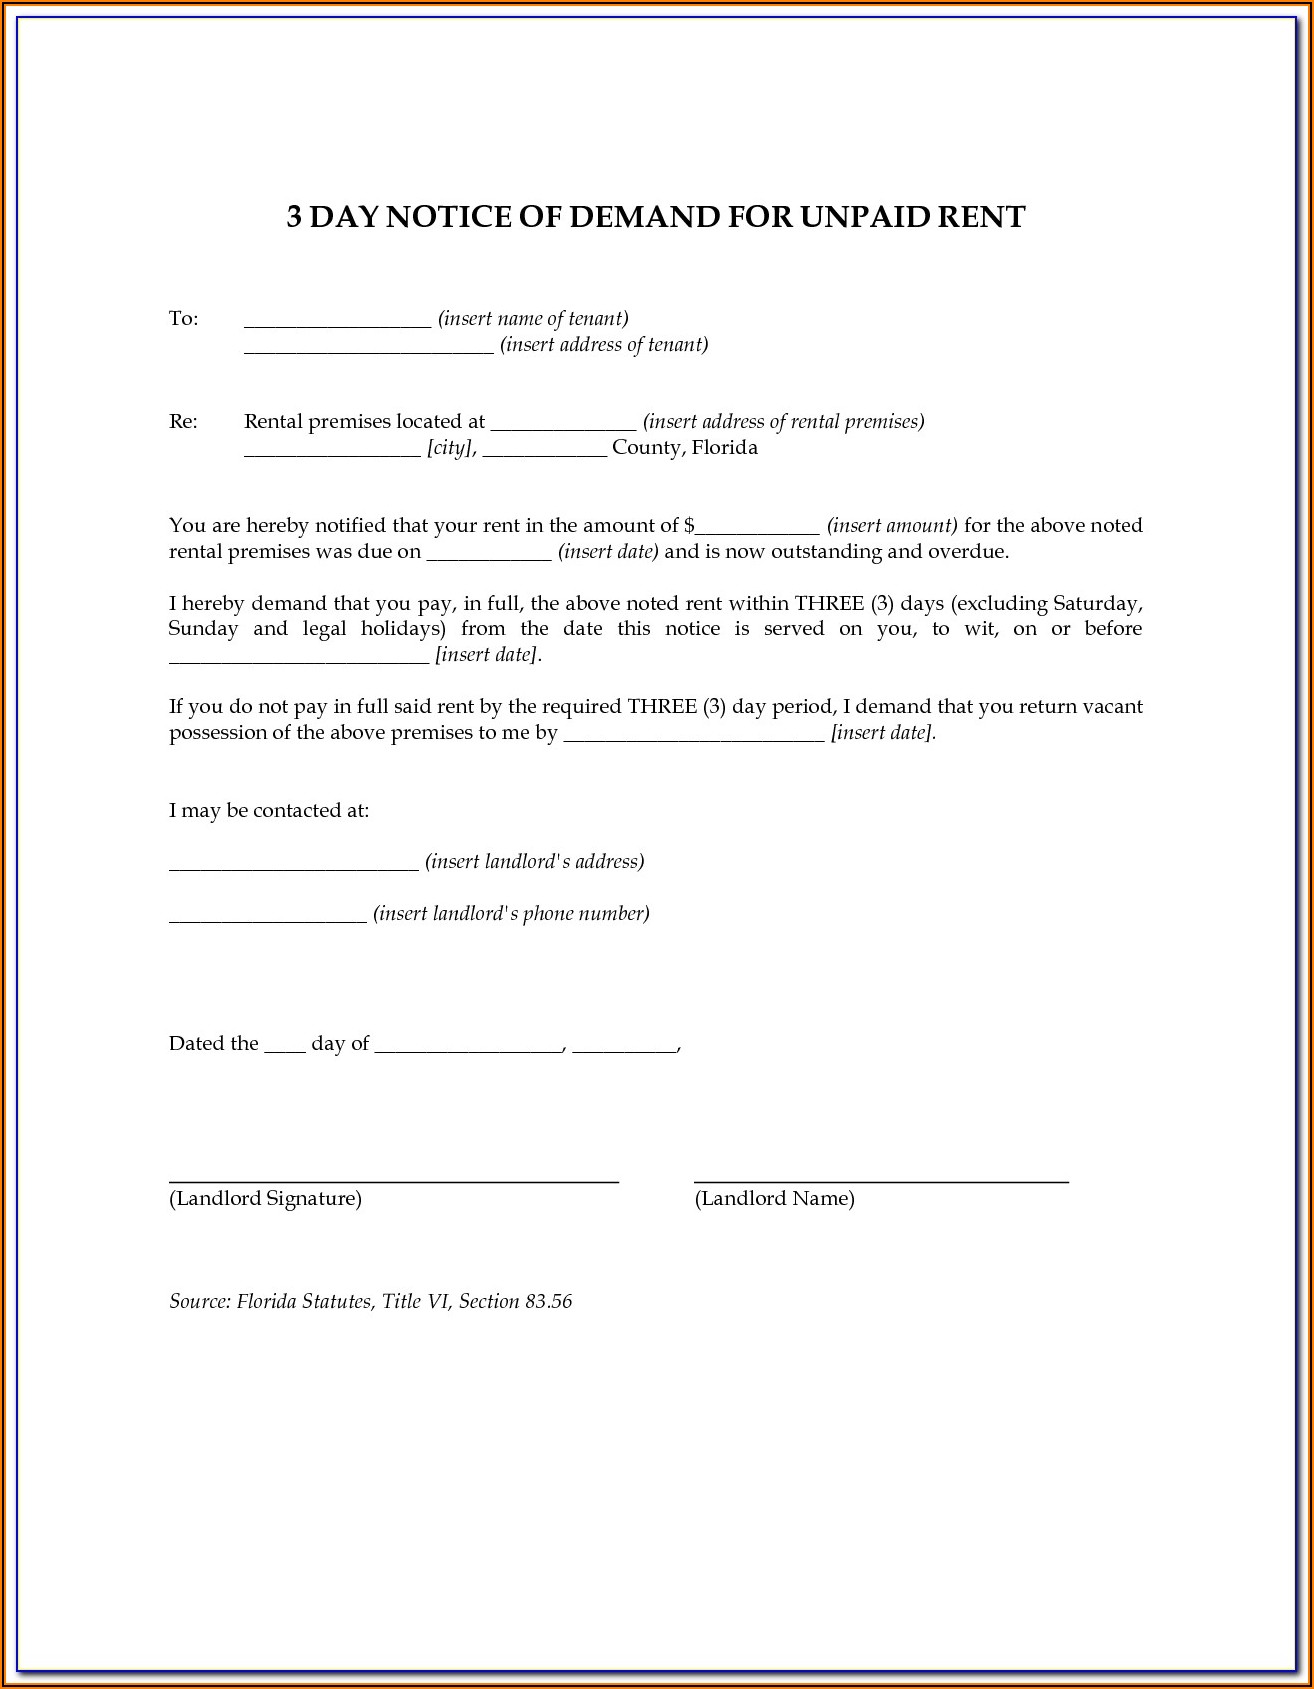 Florida Landlord Tenant Law Forms